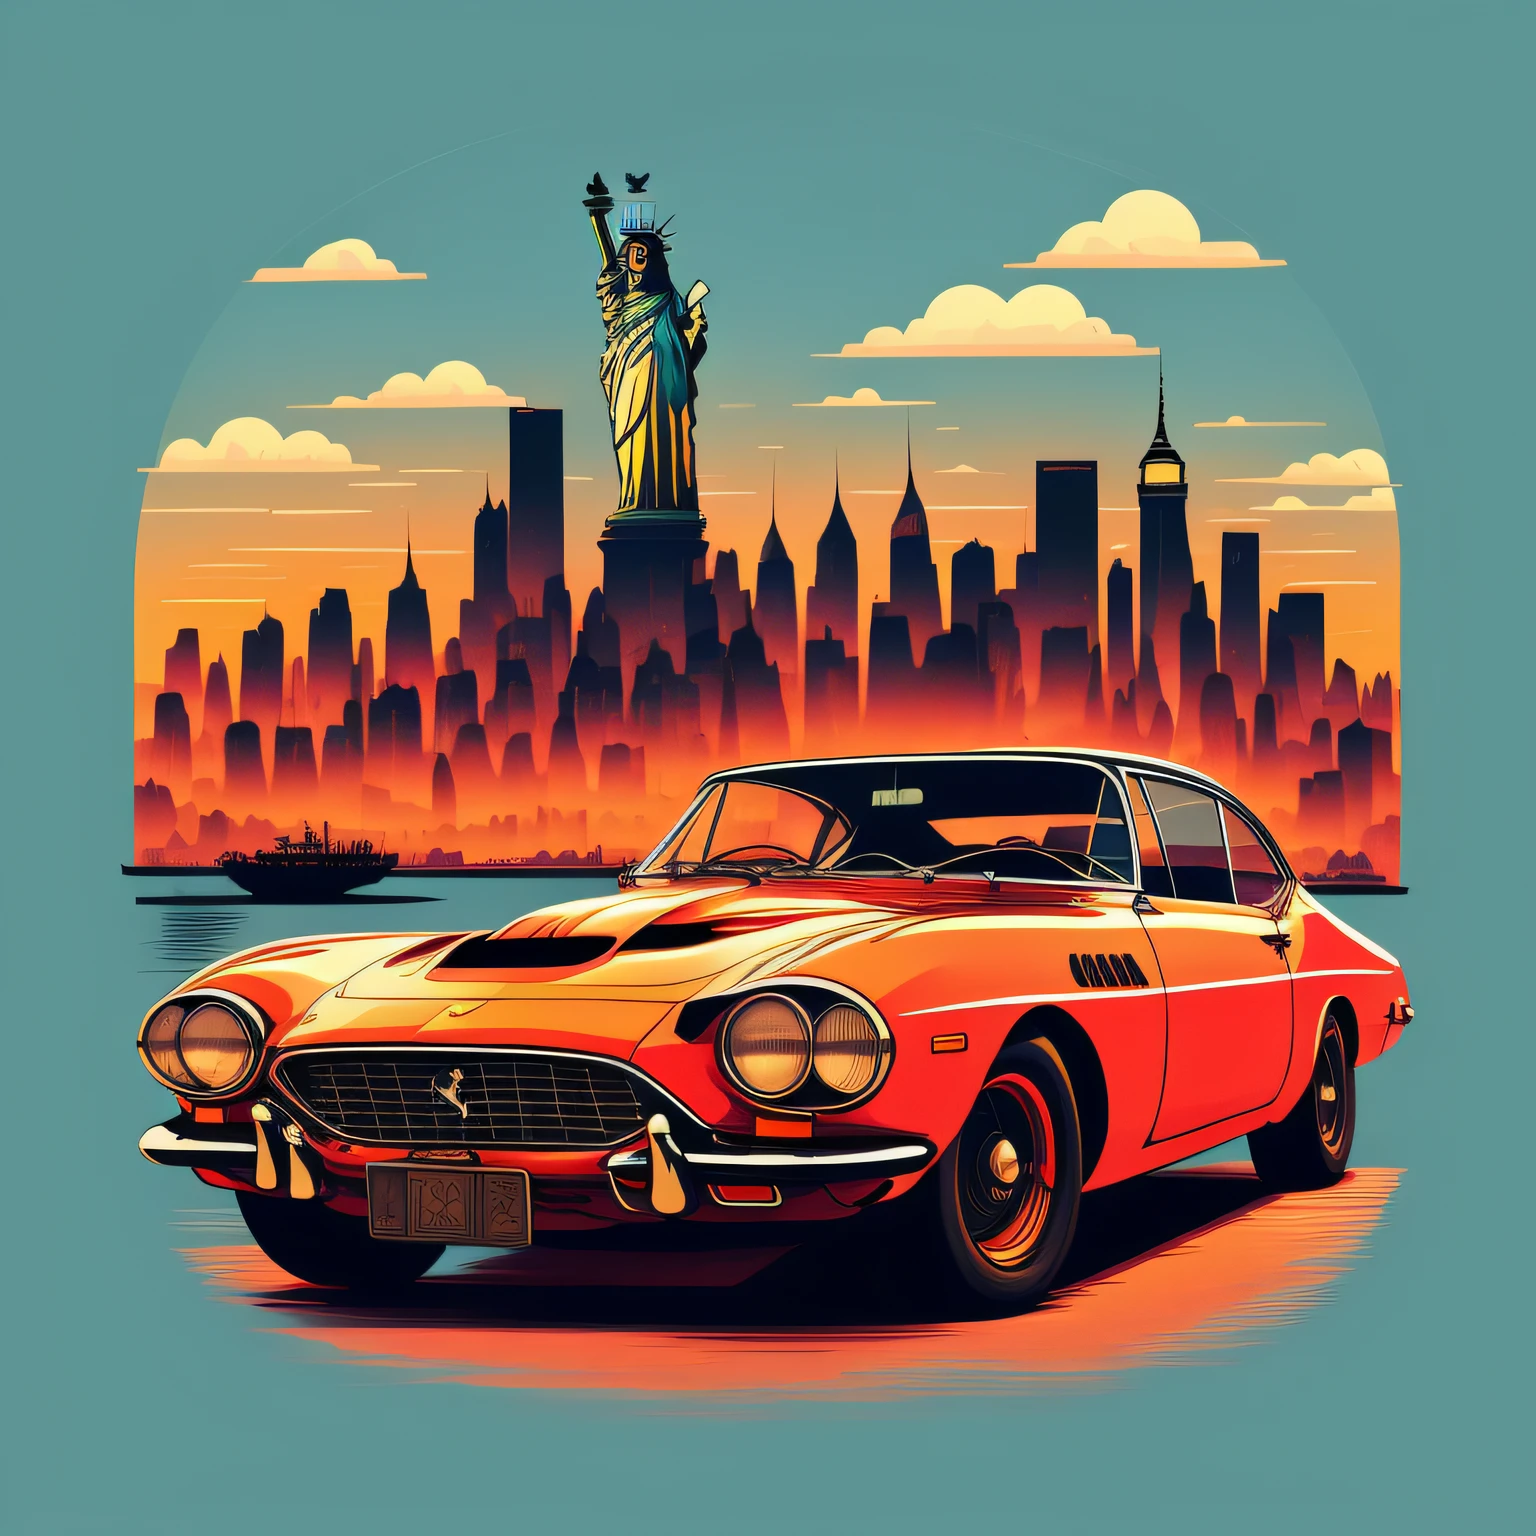 I would like a unique t-shirt design featuring a classic Ferrari in the backdrop of New York City.The illustration should showcase the nighttime view of the city, with its towering skyscrapers and vibrant lights.The classic Ferrari should be depicted with intricate details, highlighting its sleek and powerful design.To add a touch of futurism, incorporate reflections of lights on mirrored buildings.Include iconic elements like the Statue of Liberty or famous bridges to emphasize the New York City atmosphere.The illustration should convey a sense of speed, adventure, and the energetic pulse of the city.Combining realism with abstract elements, create a modern and dynamic style for the design.The t-shirt design should appeal to a broad audience, capturing the essence of both automotive enthusiasts and lovers of urban landscapes.Use high-quality vector graphics for optimal printing results.Please deliver the final design in a digital format compatible with common printing methods.